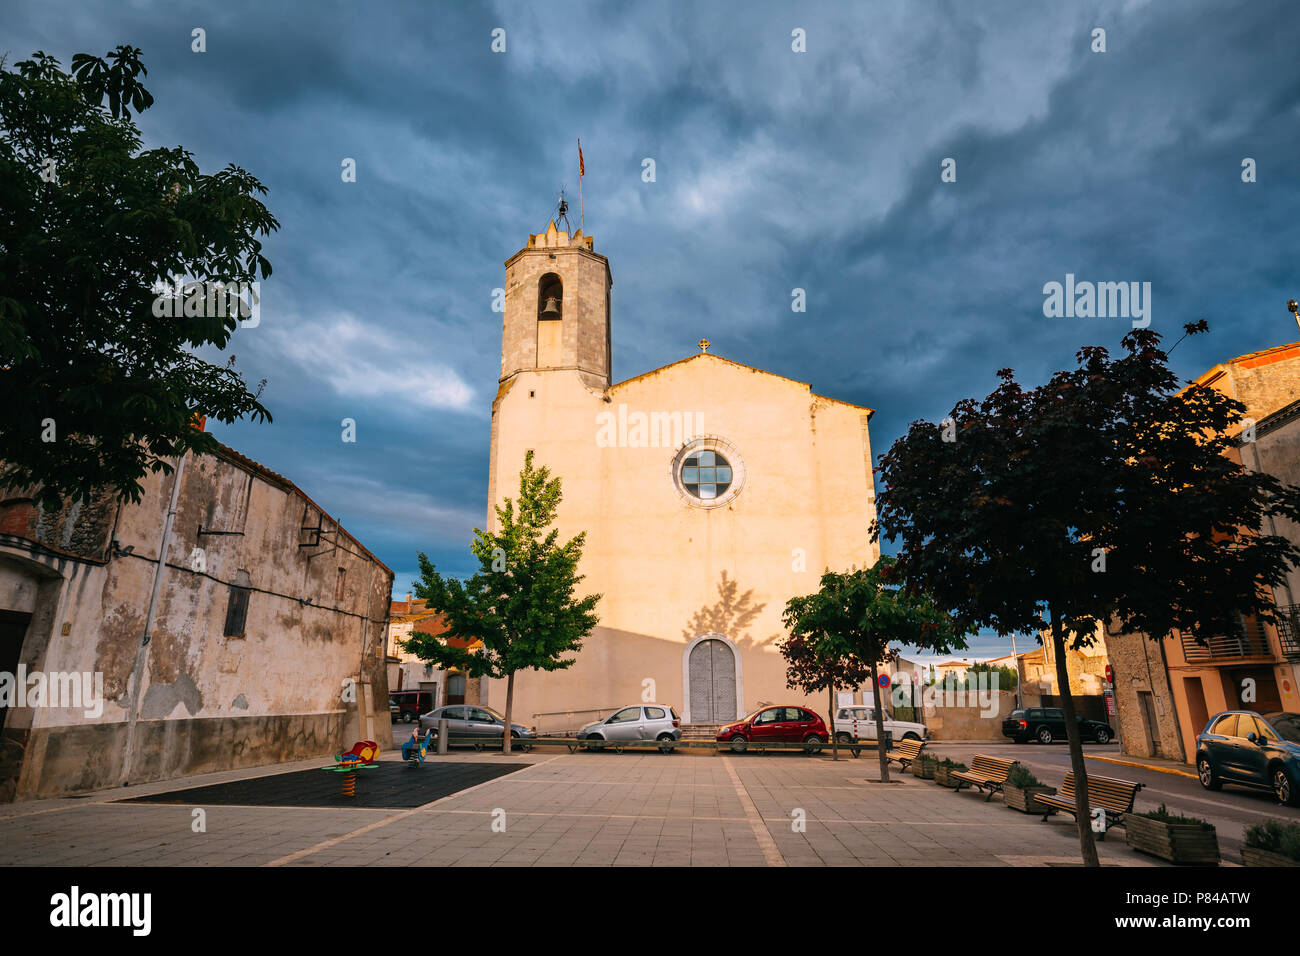 L'Armentera, Girona, Spain. The Church Of Our Lady Of Armentera In Sunny Summer Evening. Stock Photo